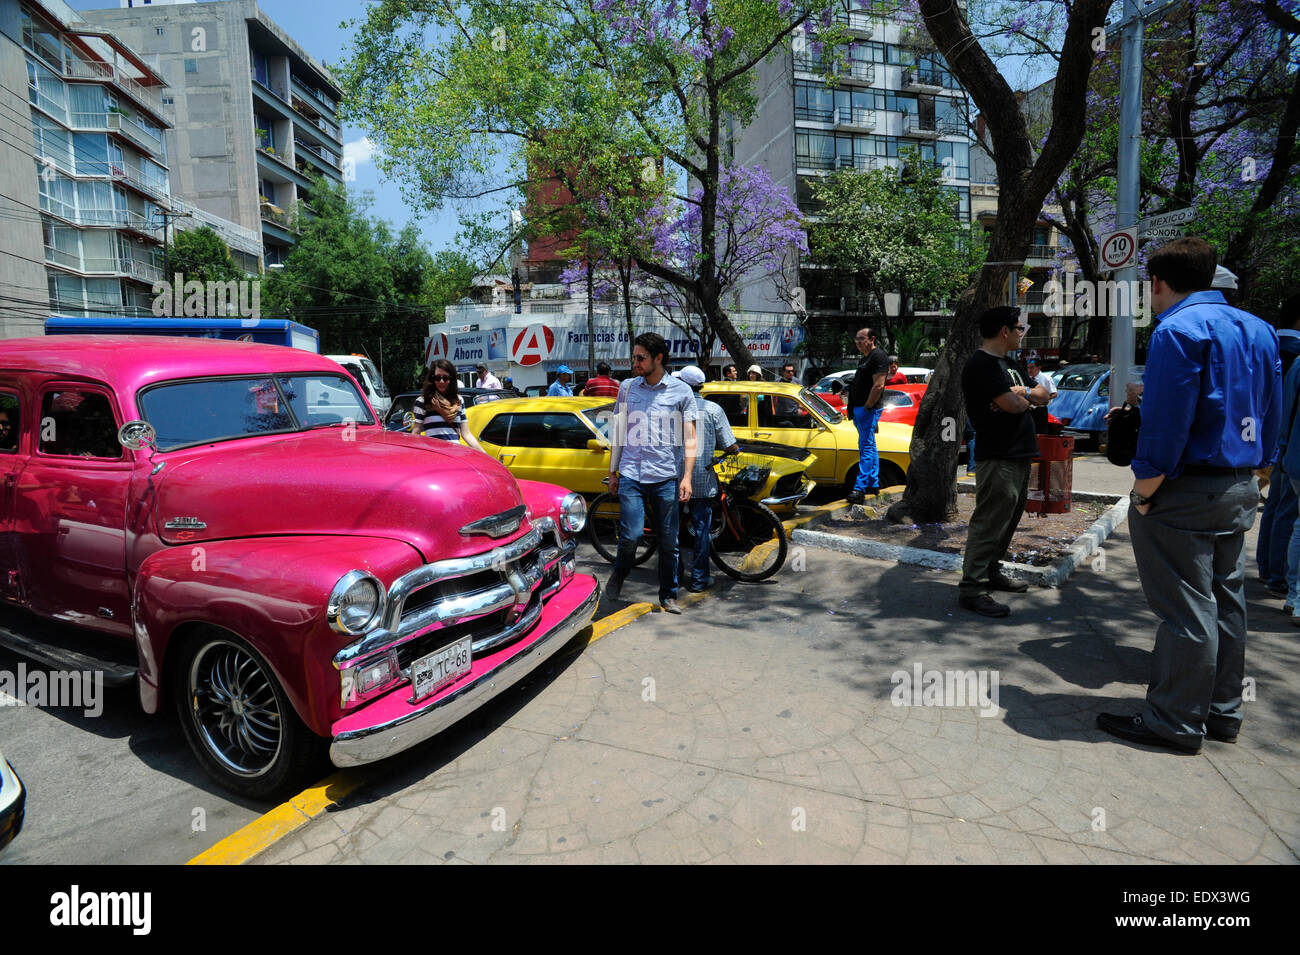 Vintage car show in Mexico City near Mexico Park in the Condesa area of the city. Stock Photo